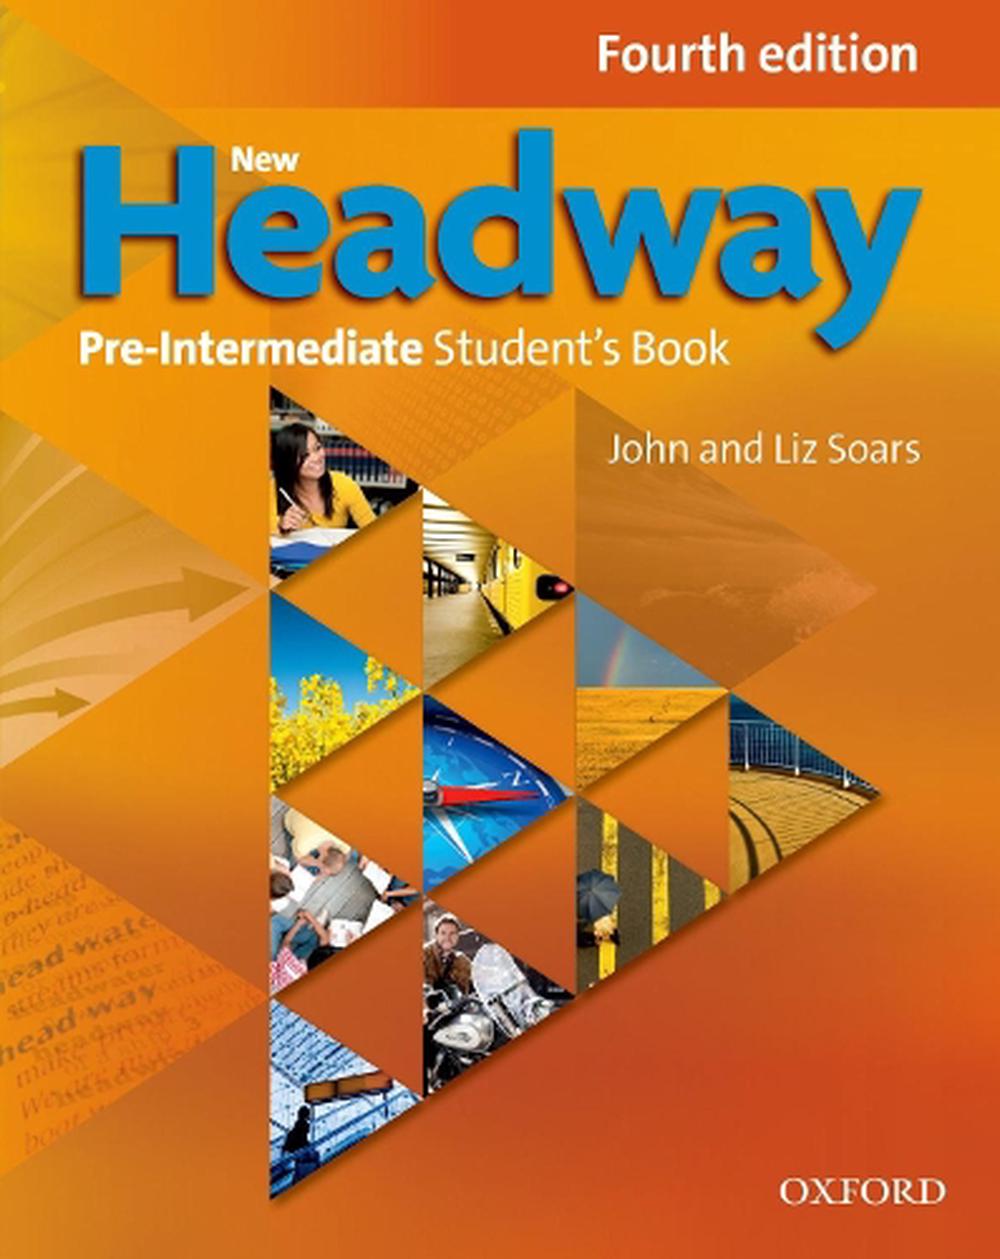 The　Pre-Intermediate　by　online　at　Headway　New　Buy　9780194770248　Paperback,　Student's　Soars,　Book　Nile